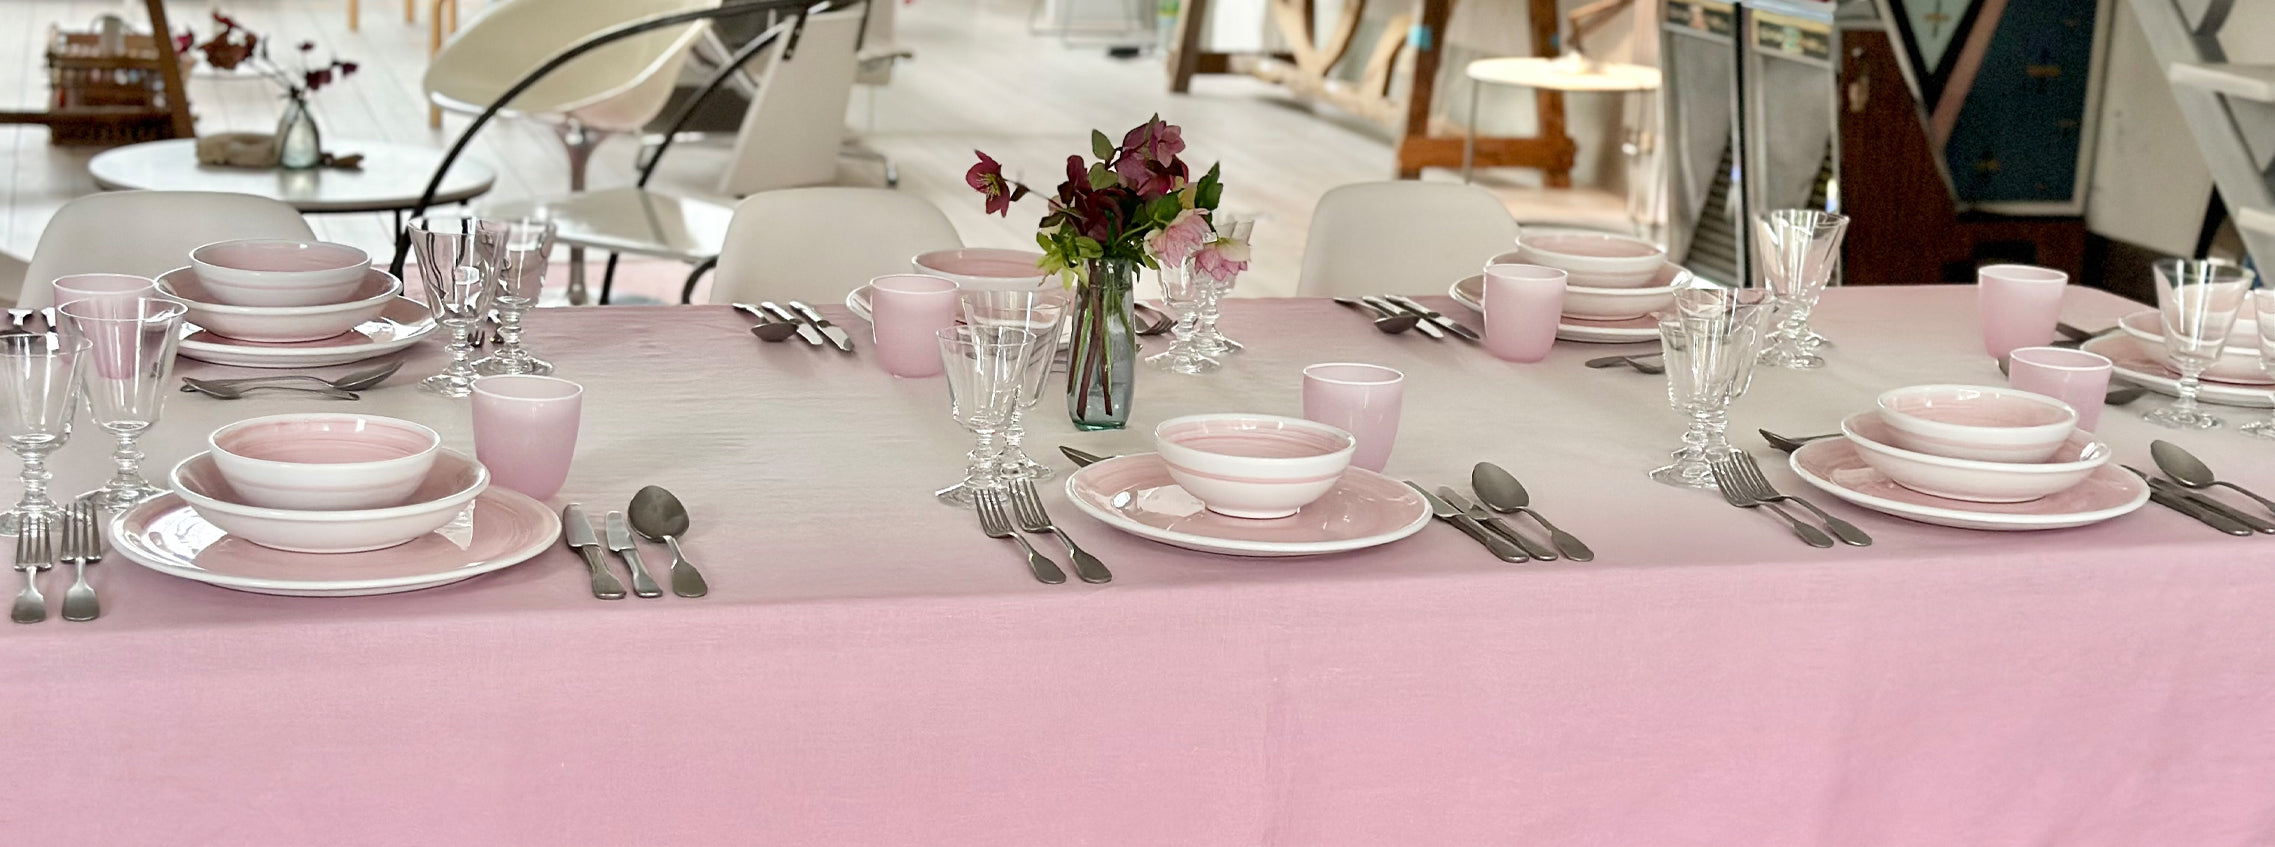 'Simply June' Tablescape in Pink Fade